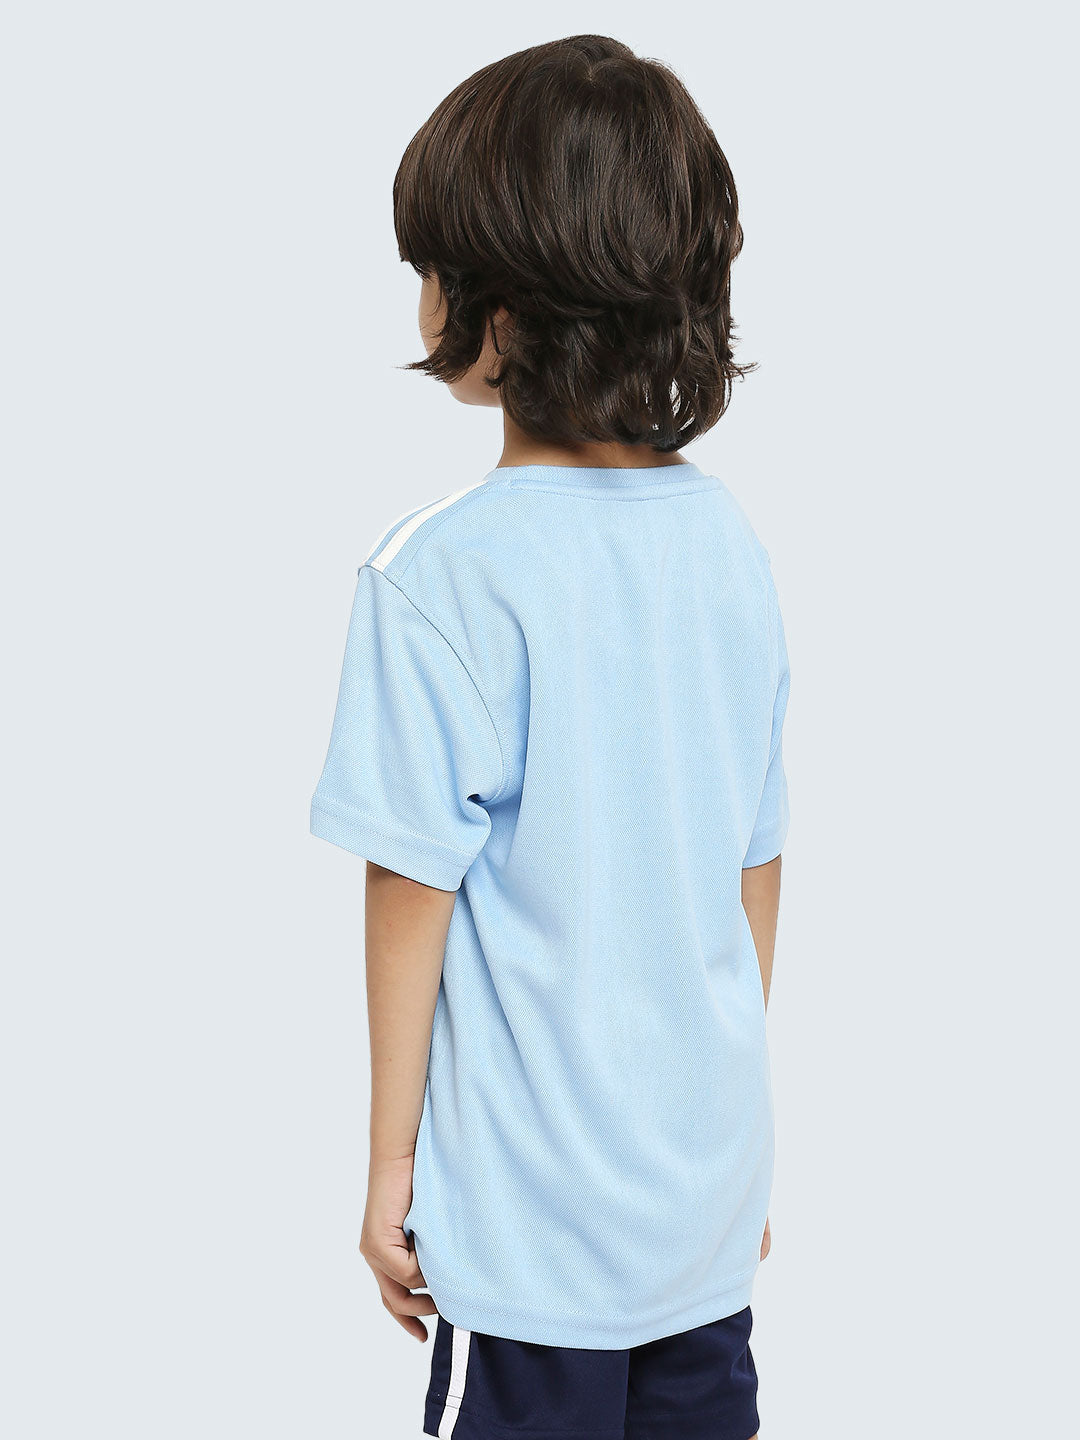 Kid's Striped Active Sports T-Shirt: Light Blue - Front